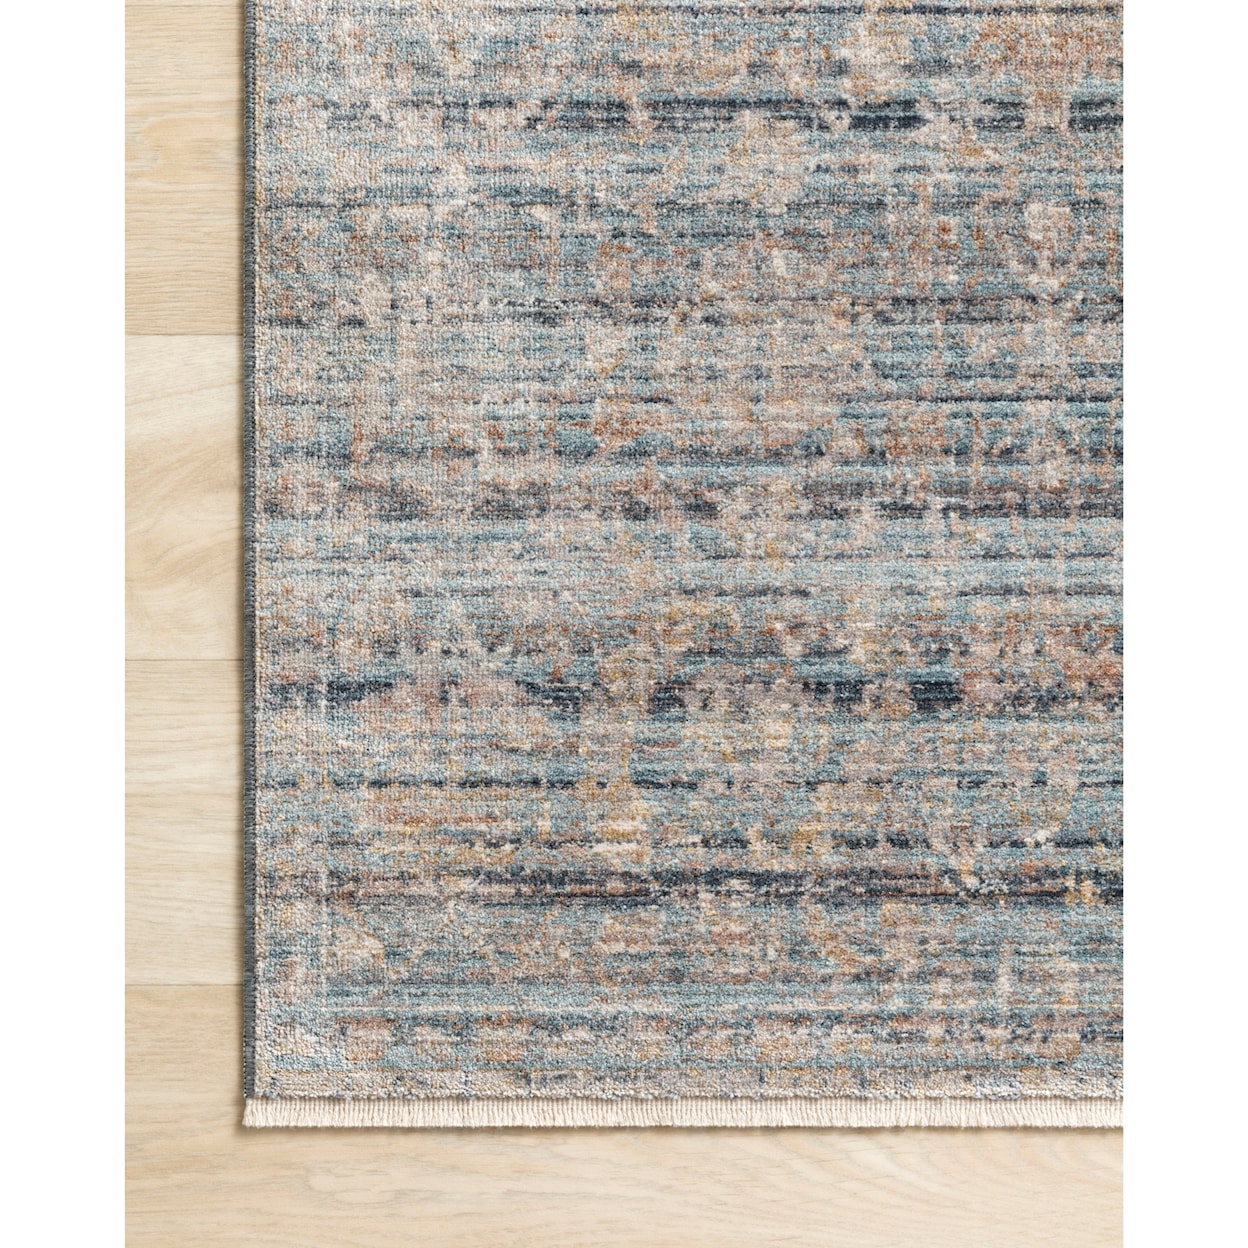 Loloi Rugs Claire 11'6" x 15'7" Ocean / Gold Rug